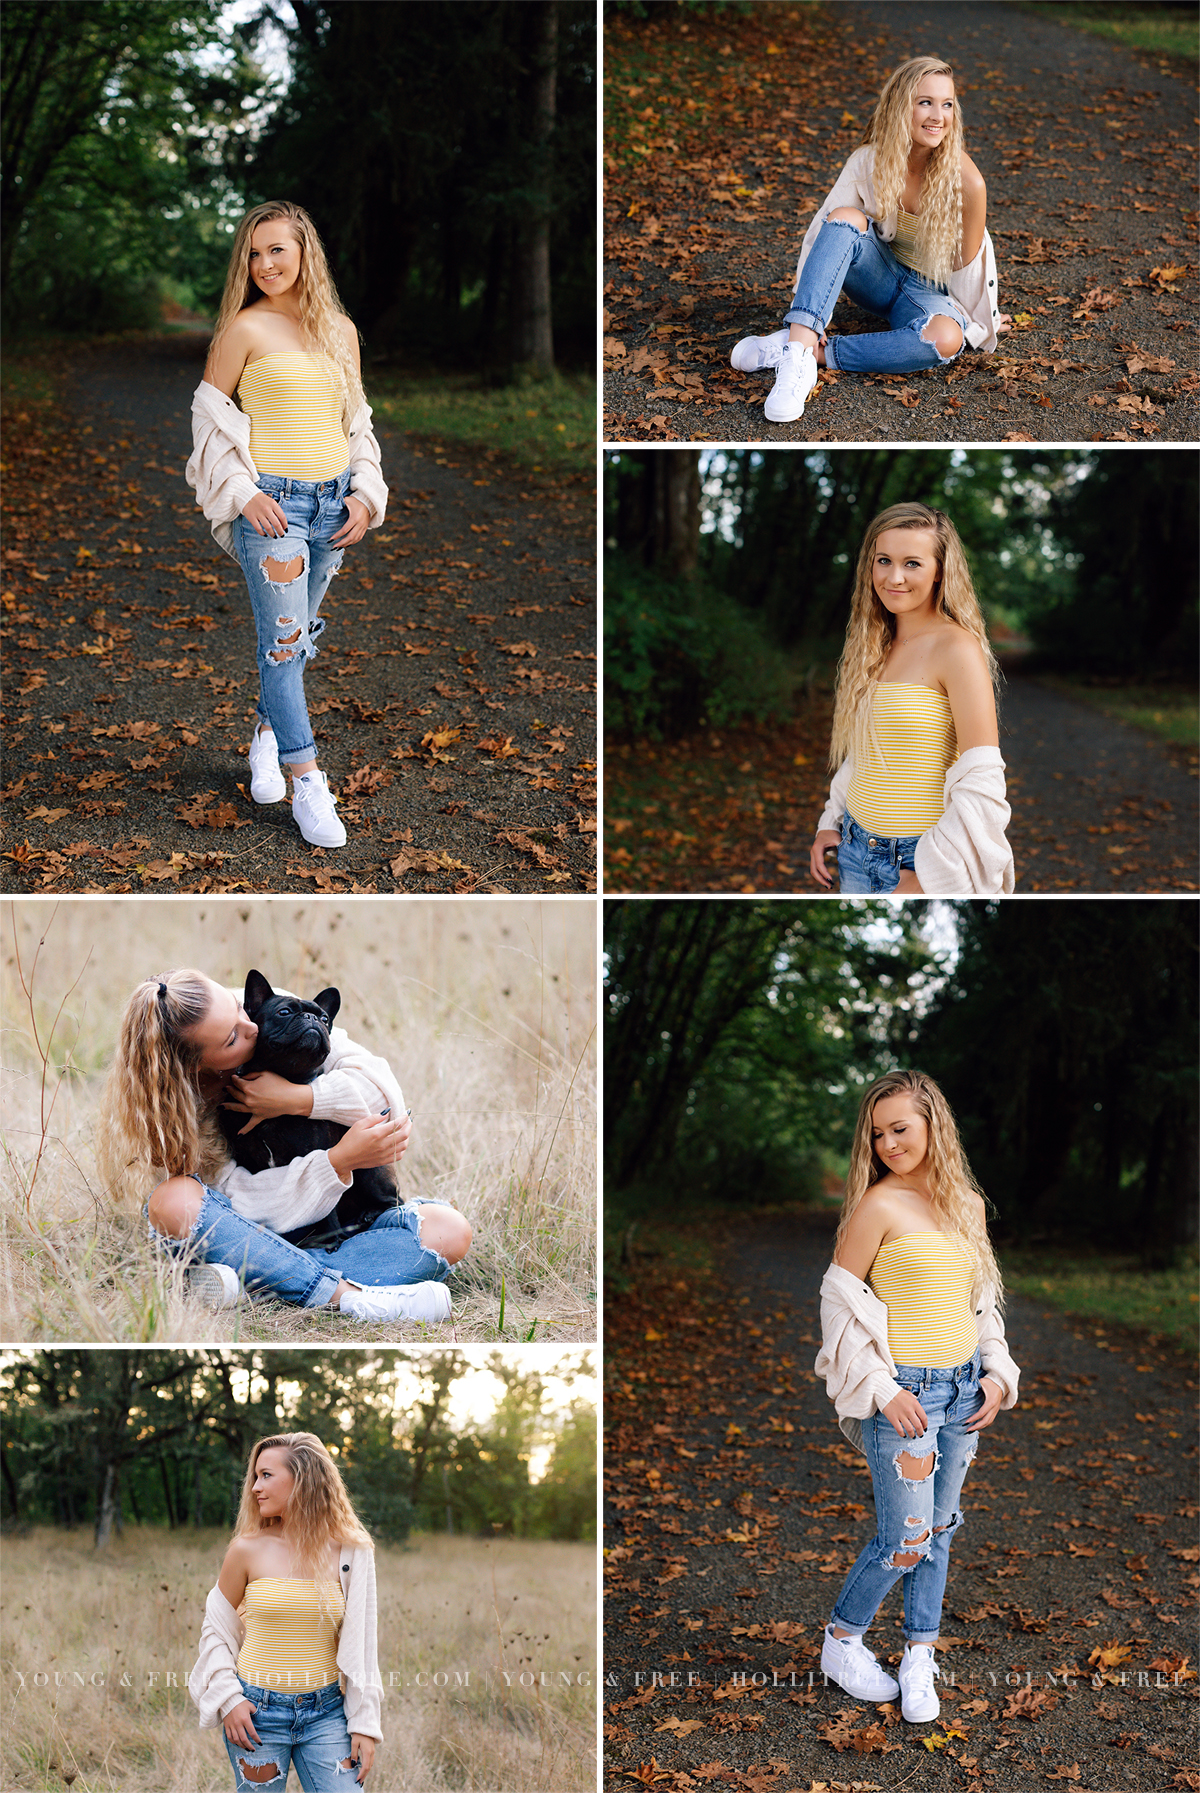 Beautiful & Natural Eugene Senior Portraits in a rustic park at sunset by Eugene Senior Photographer, Holli True.